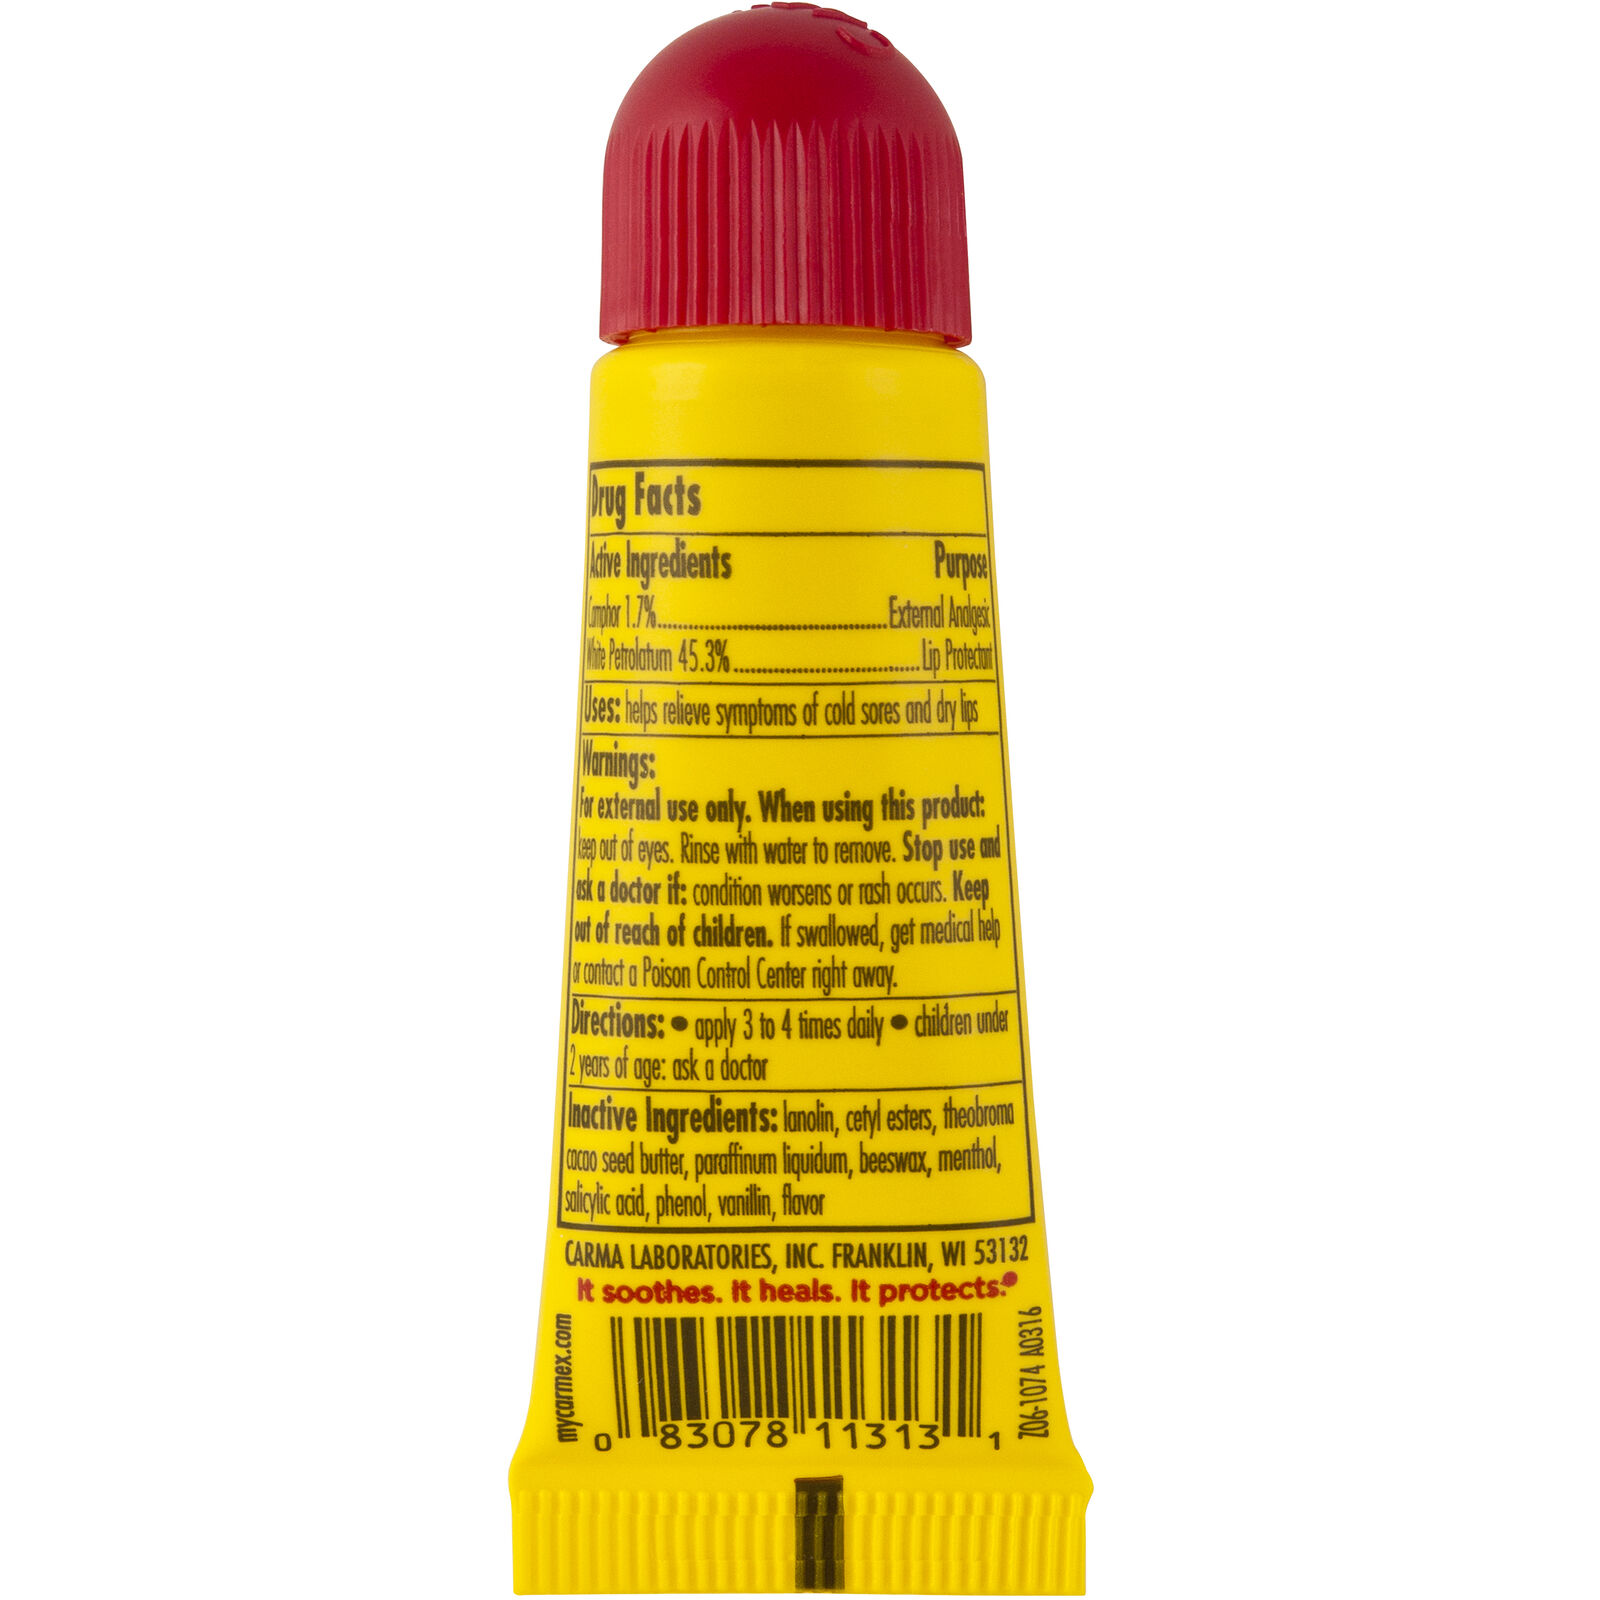 Carmex Soothing Lip Balm, Strawberry 0.35 oz (Pack of 2) - image 4 of 4